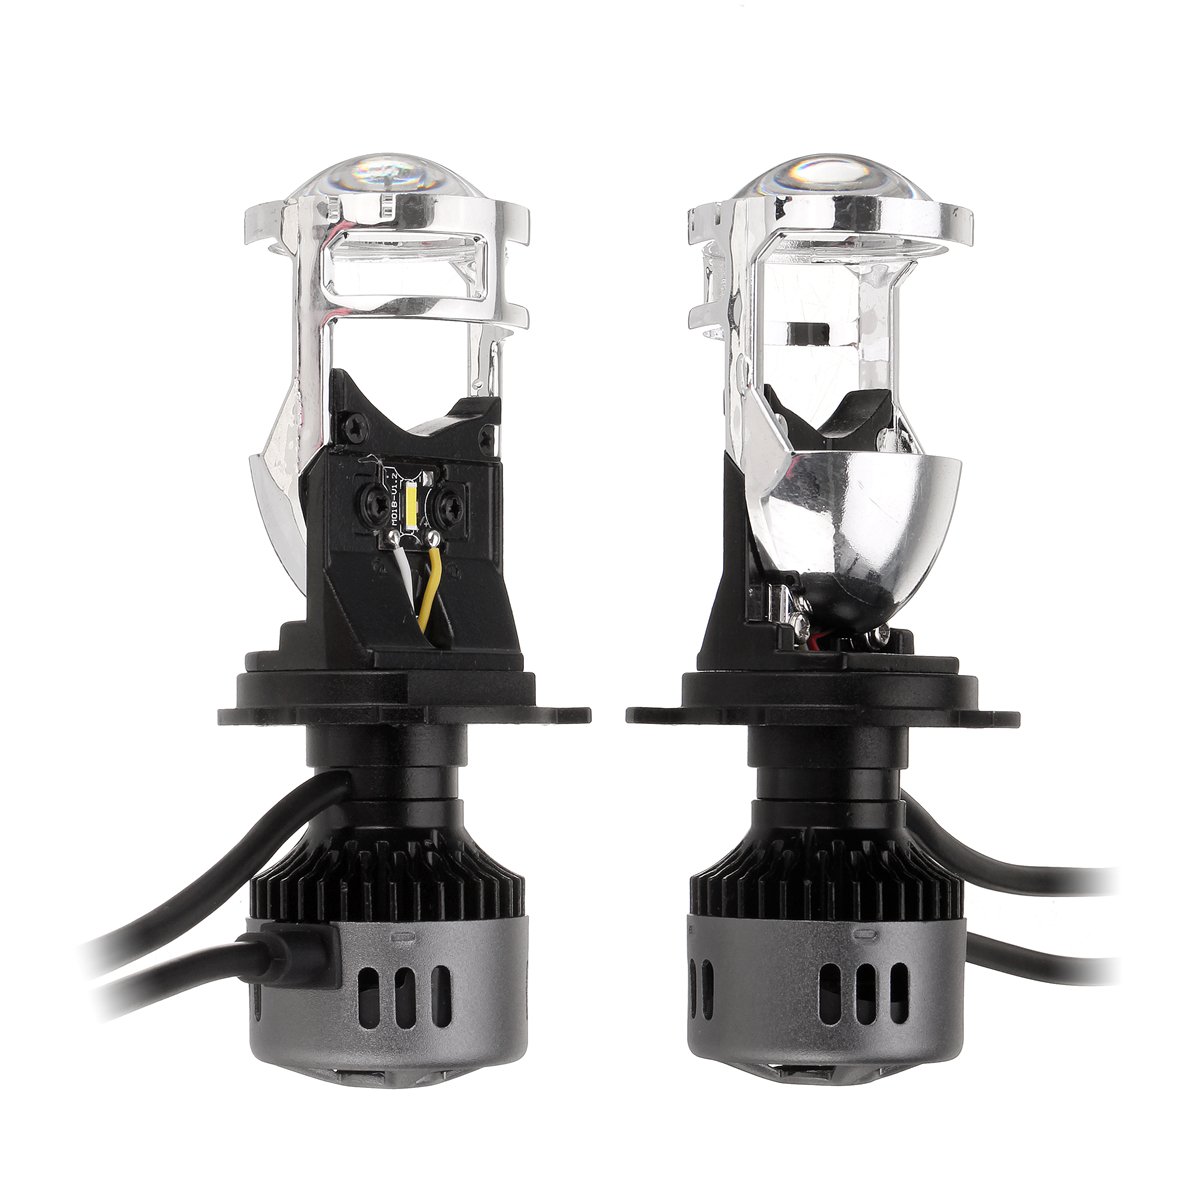 G9 H4 LED Headlights with Mini Projector Lens Hi/Lo Beam Bulb 60W 9600LM 6500K White for Car Motorcycle 2